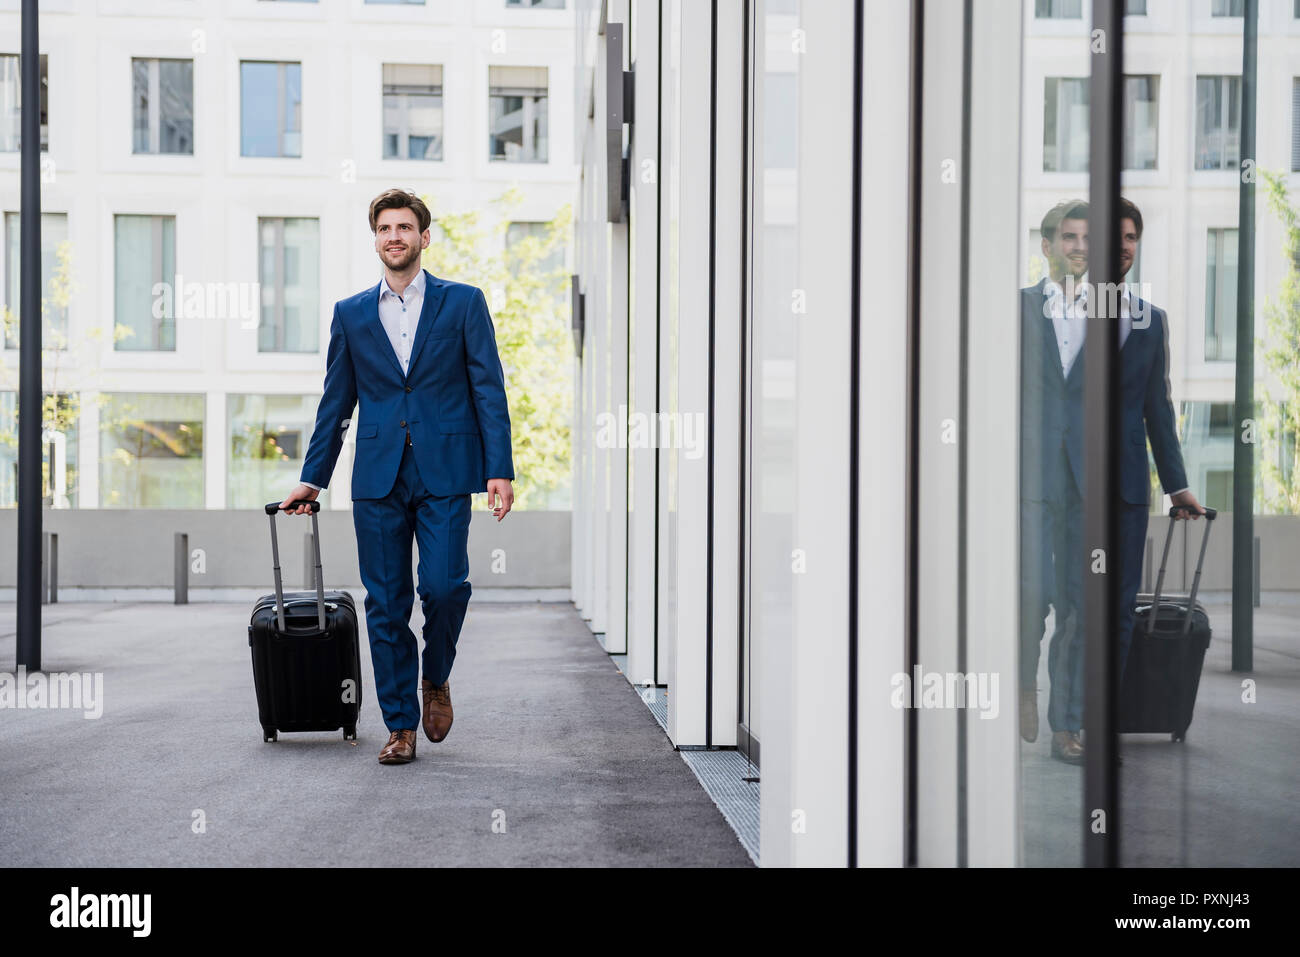 Smiling businessman with baggage in the city on the move Stock Photo